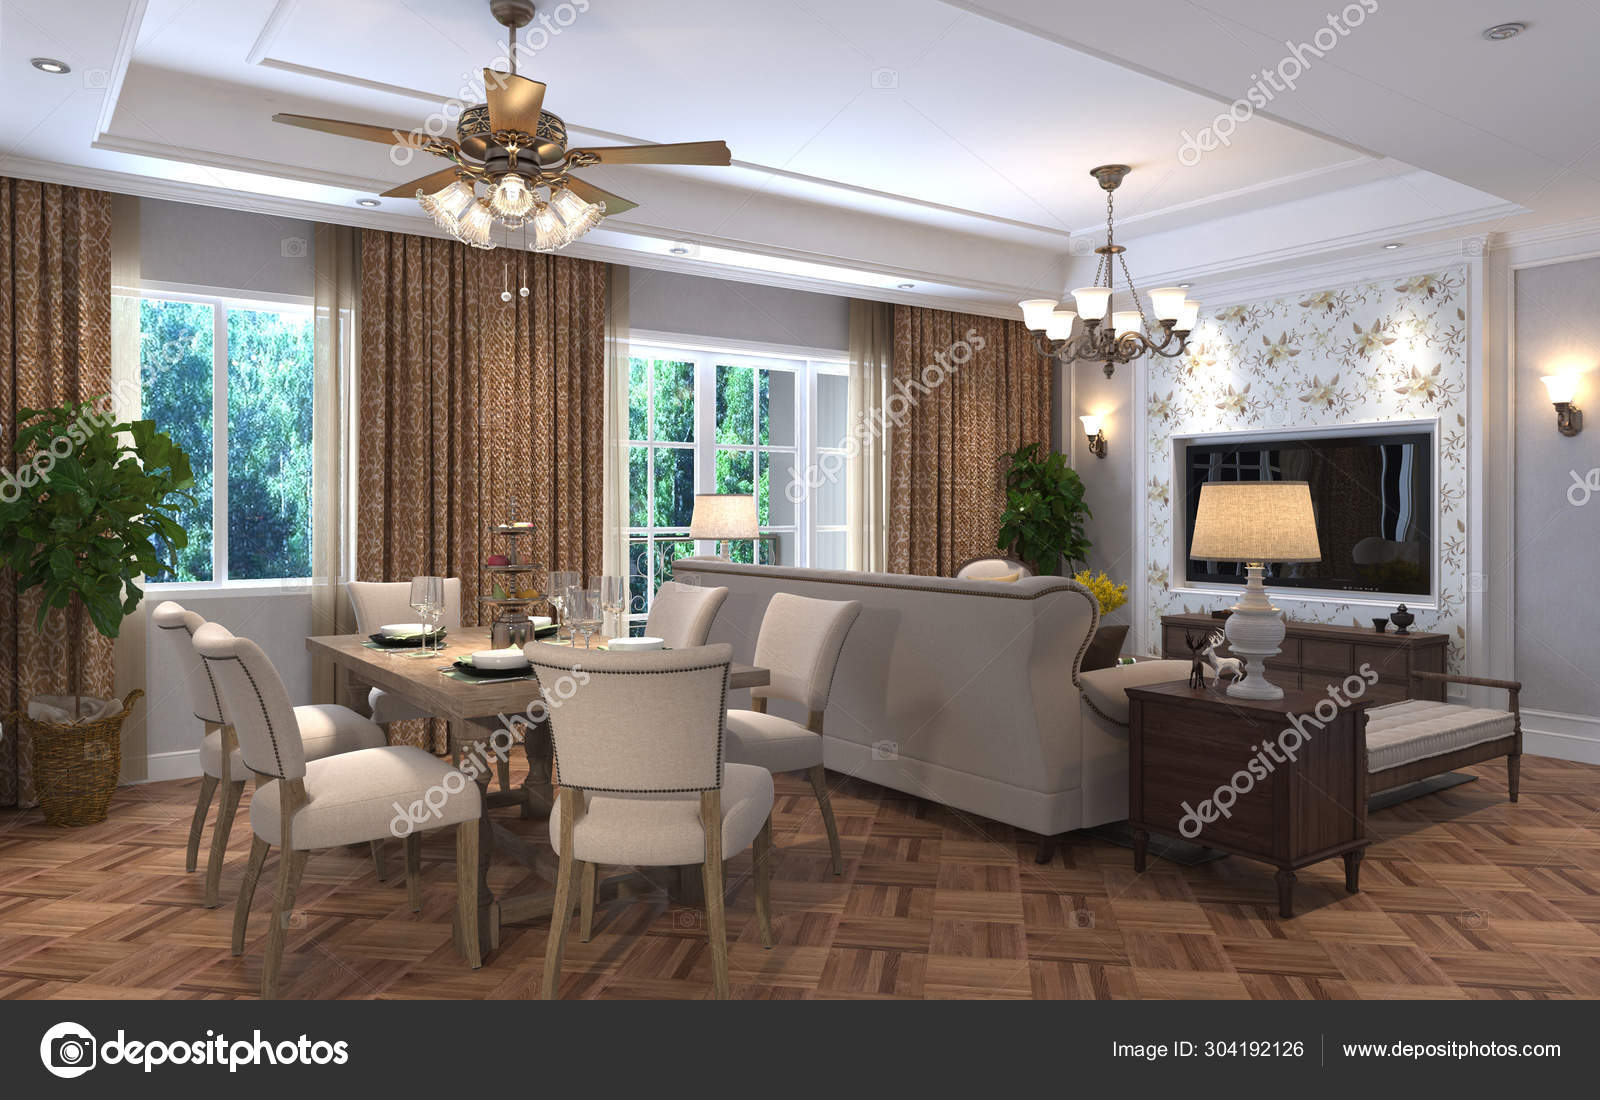 Living Room Interior In American Style 3d Illustration